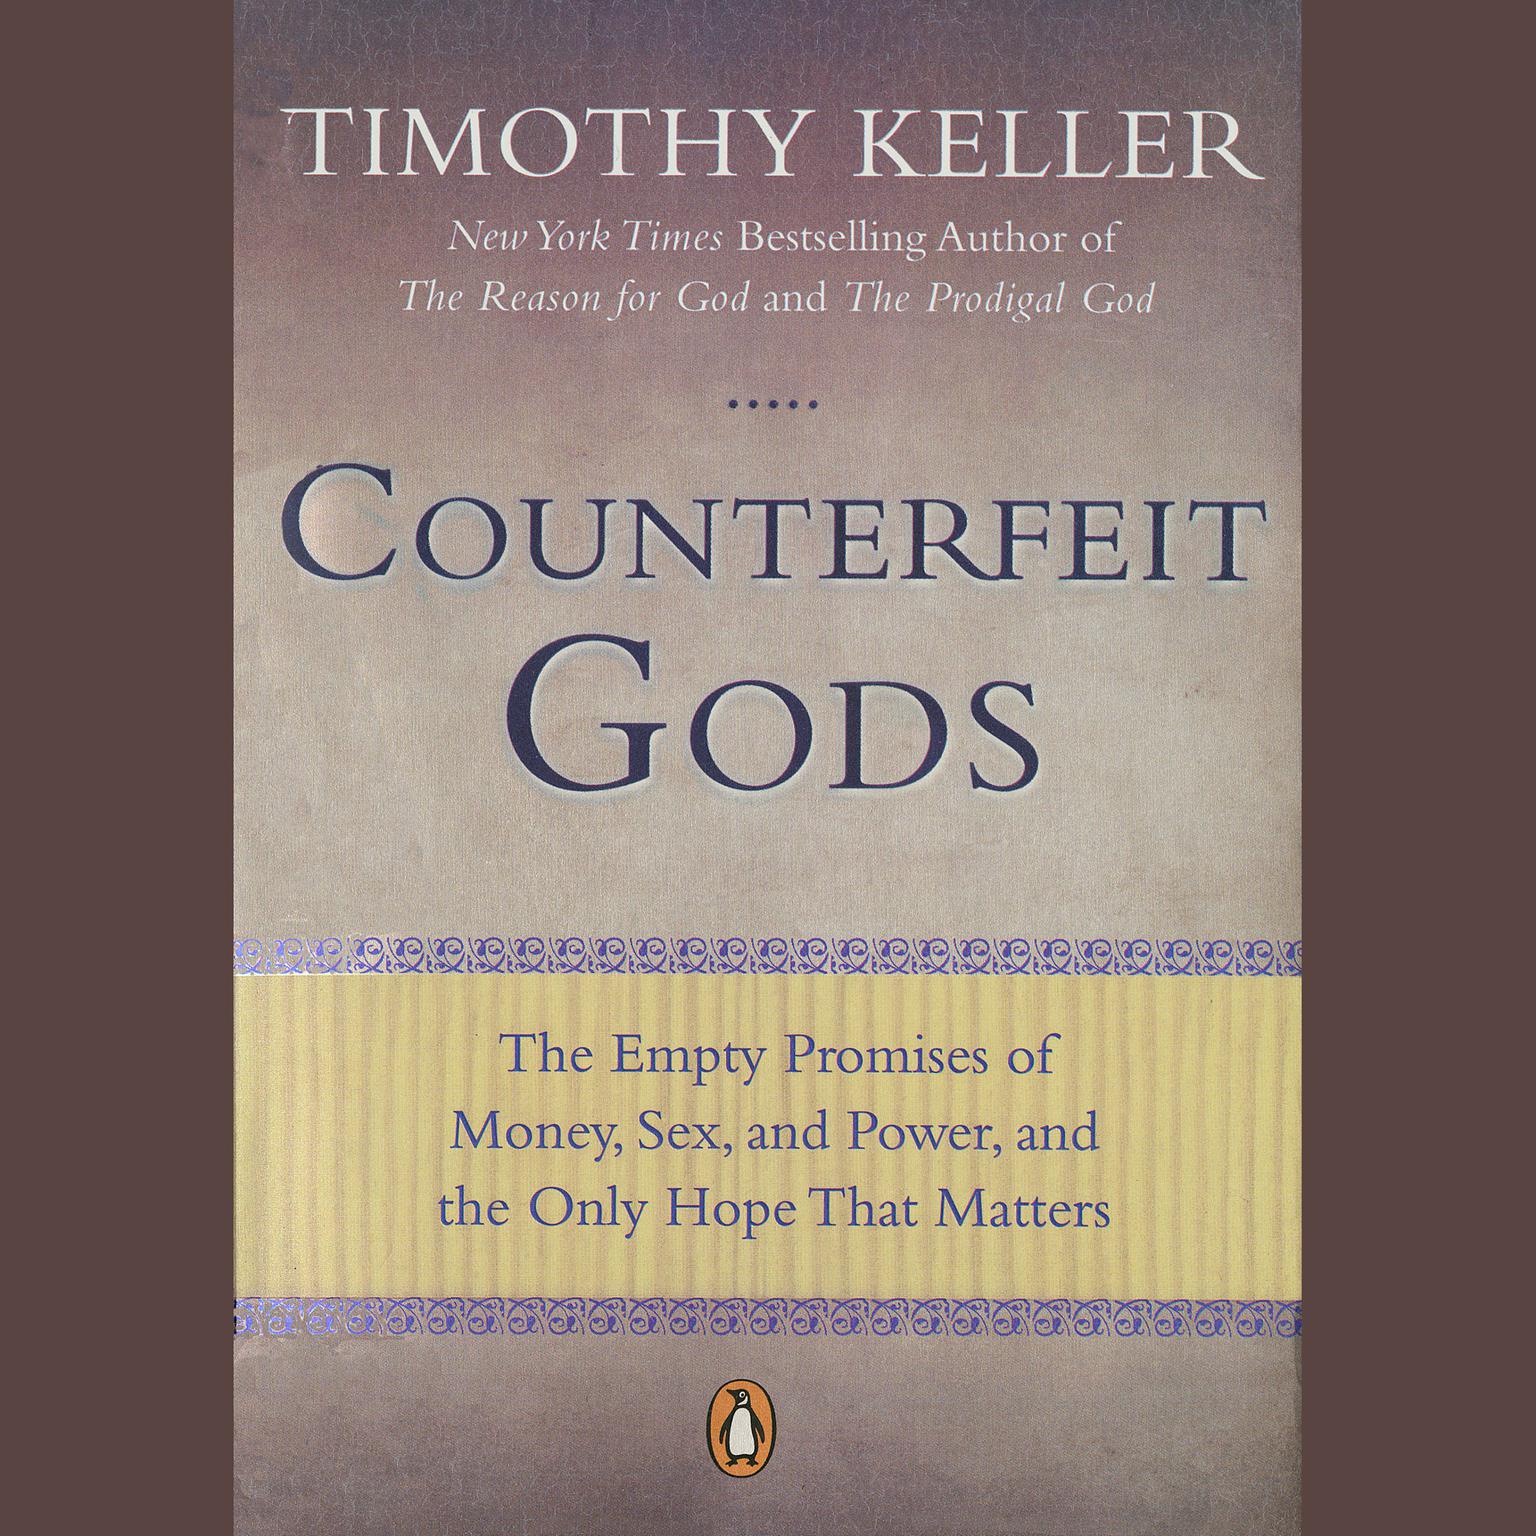 Counterfeit Gods: The Empty Promises of Money, Sex, and Power, and the Only Hope that Matters Audiobook, by Timothy Keller